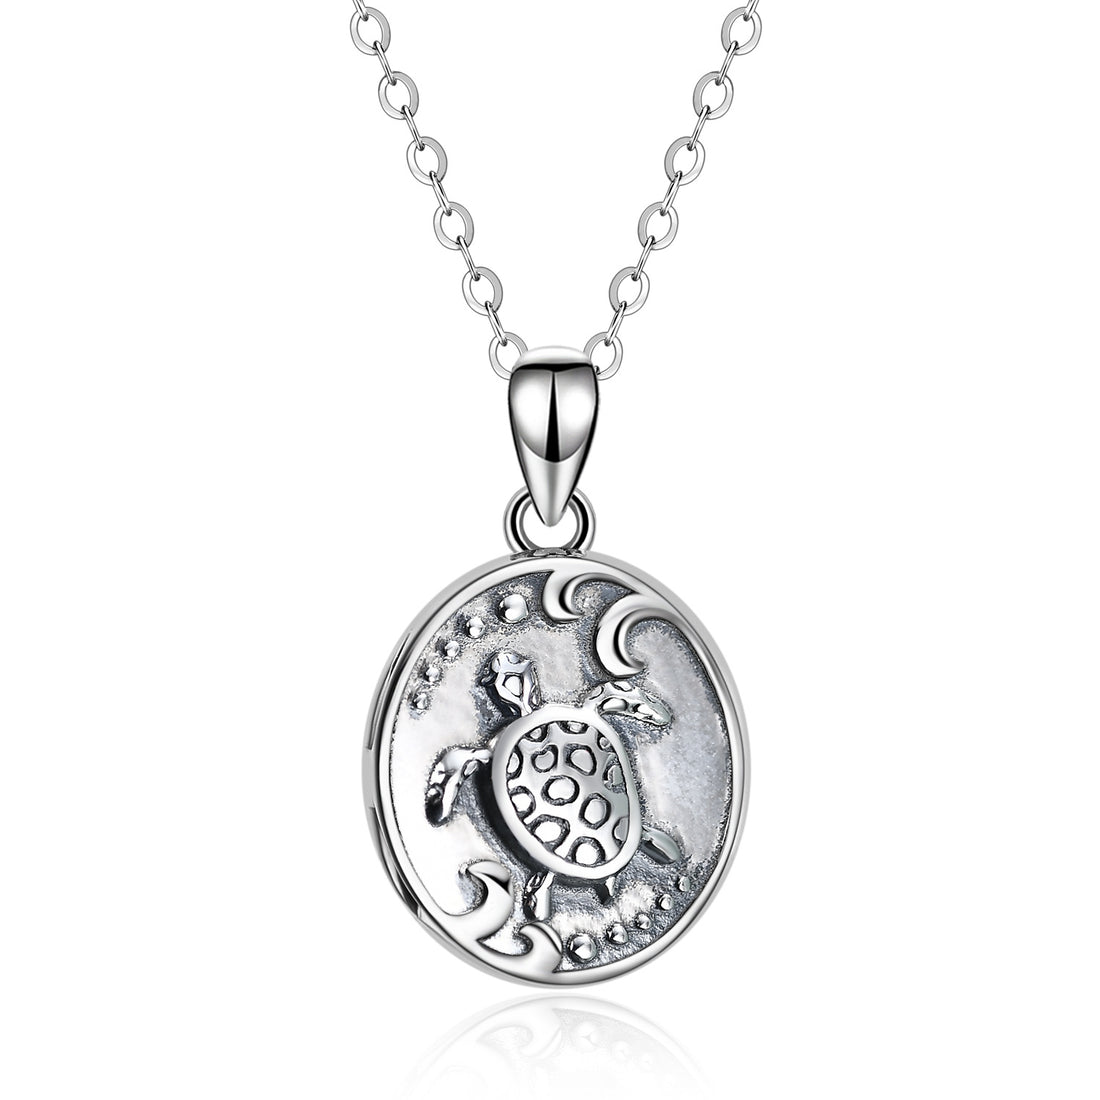 925 Sterling Silver Sea Turtle Photo Locket Necklace Photo Pendant Jewelry